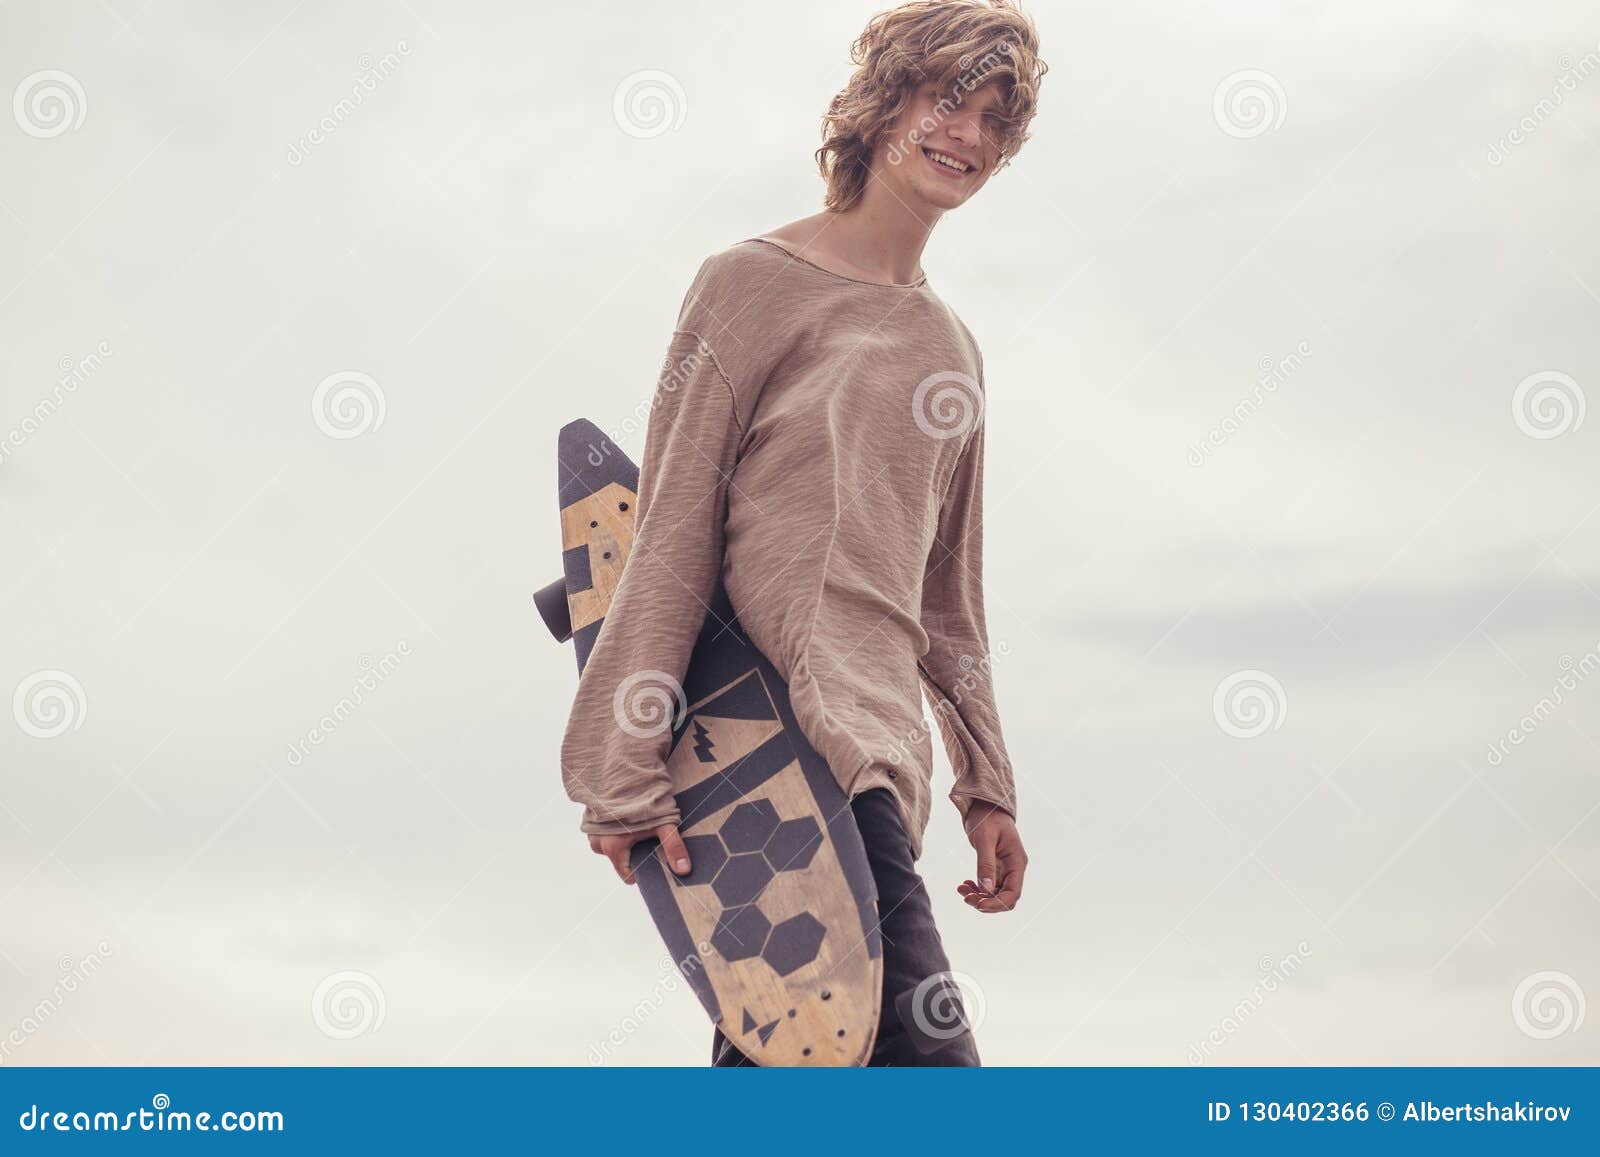 madras flyde Spaceship Stylish Man Stands on Street and Hold Long Board in Hands Stock Photo -  Image of skateboard, apparel: 130402366